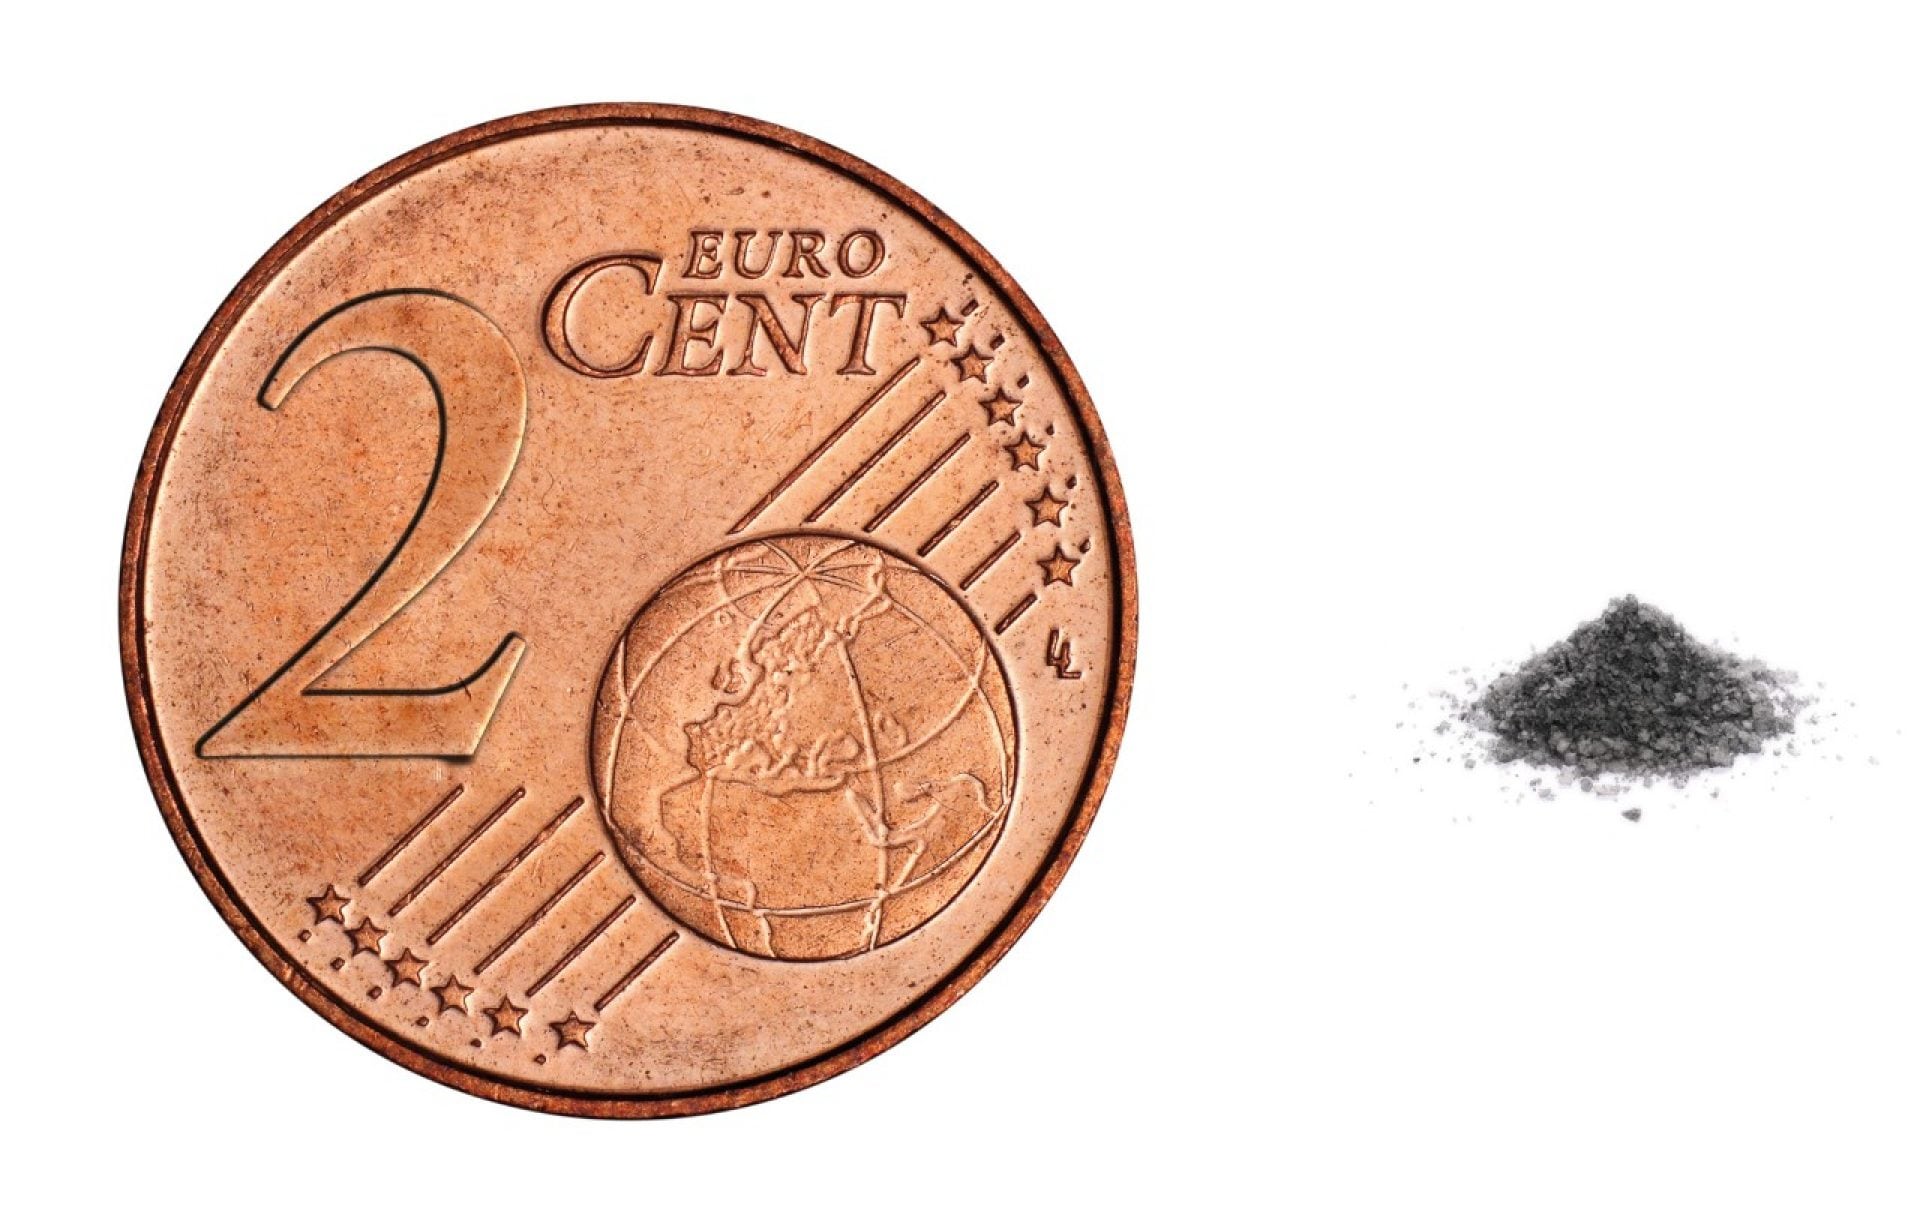 Occupational exposure limits for dust are as low as a pinch of salt or the weight of a 2 cent coin